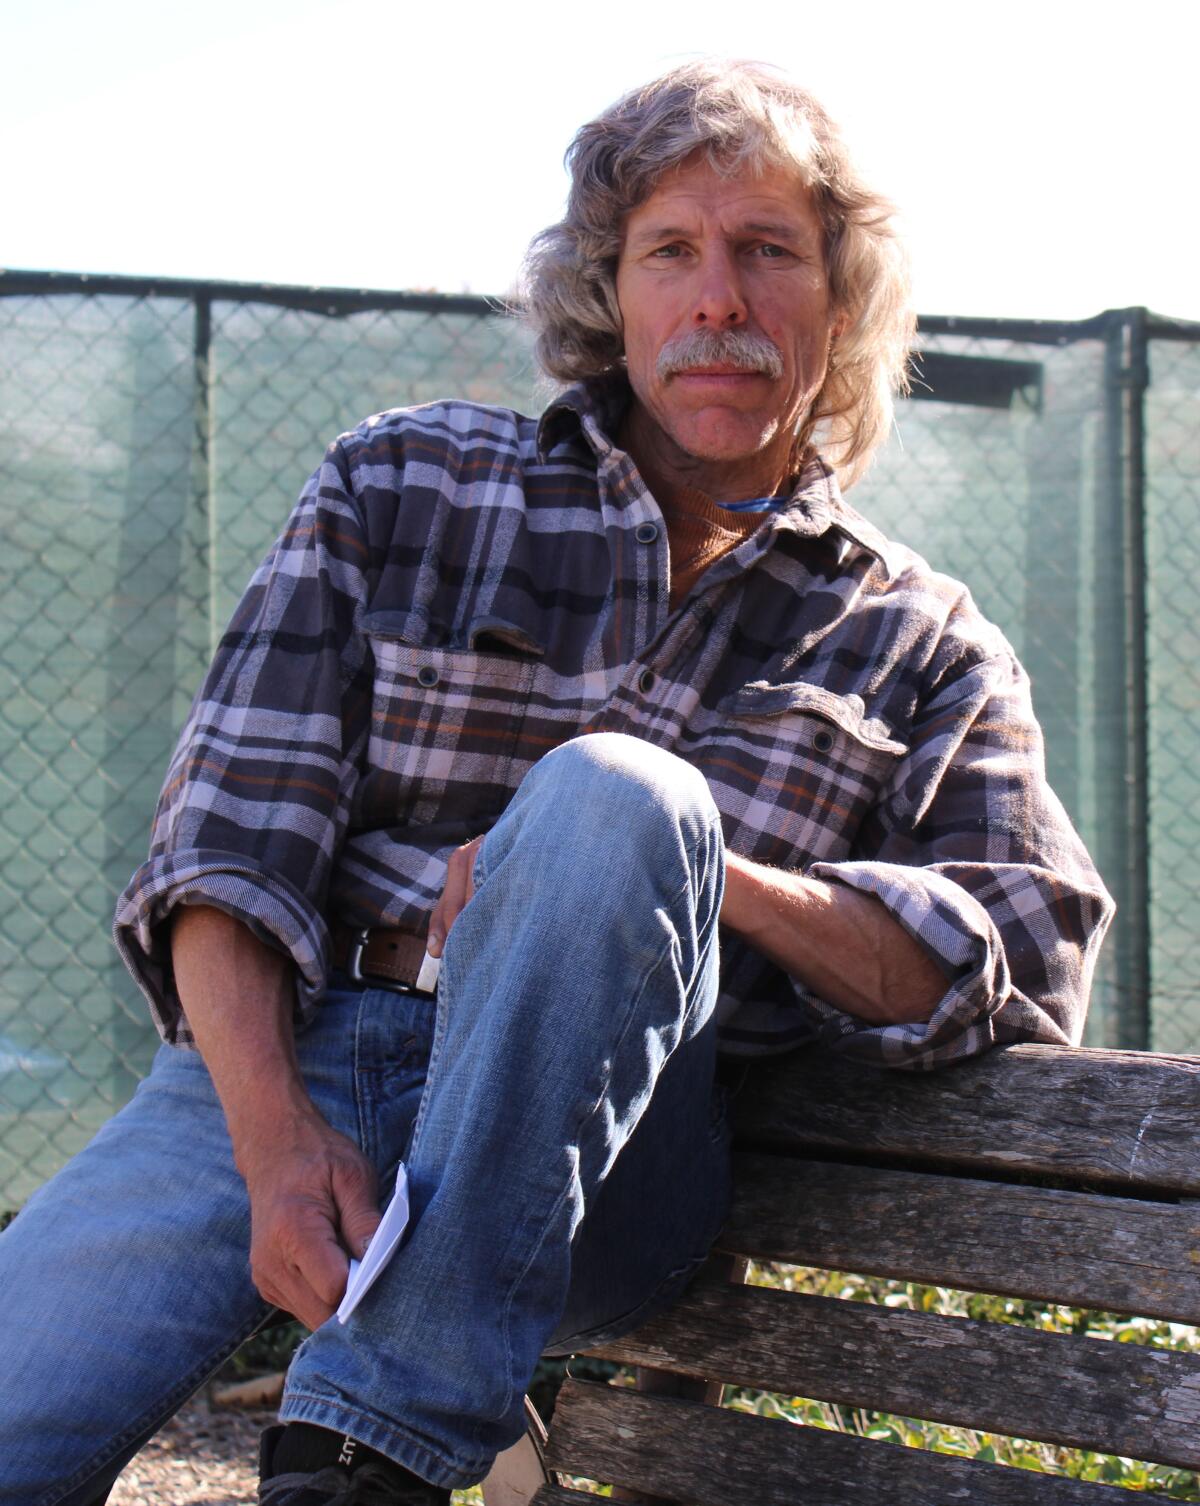 James Carver sits on a bench.